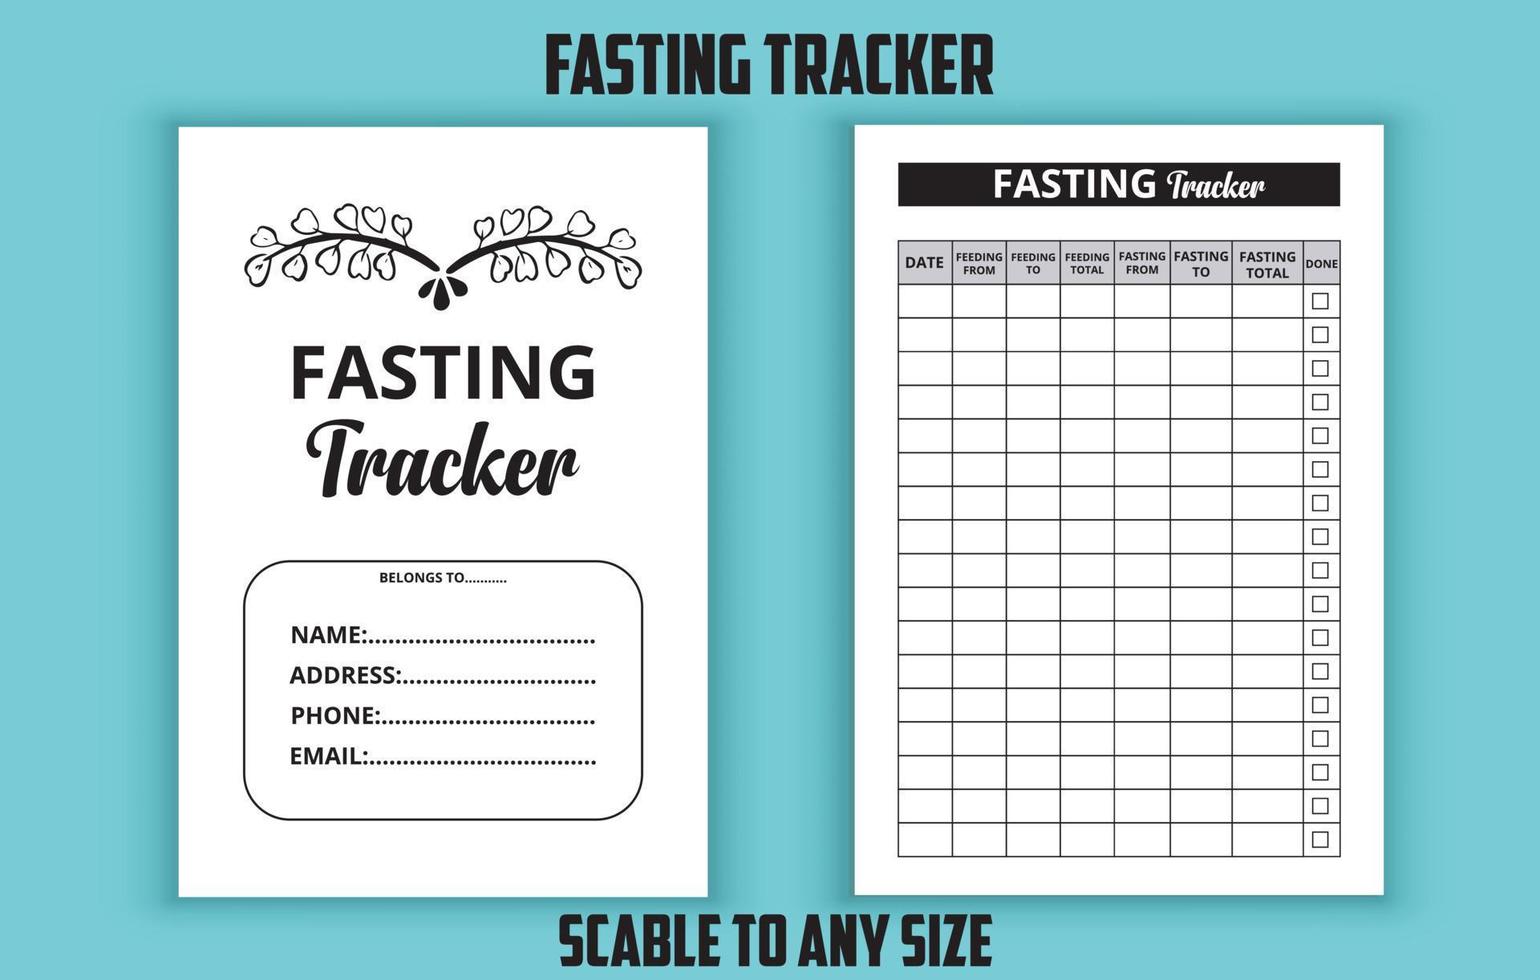 Fasting tracker editable template vector